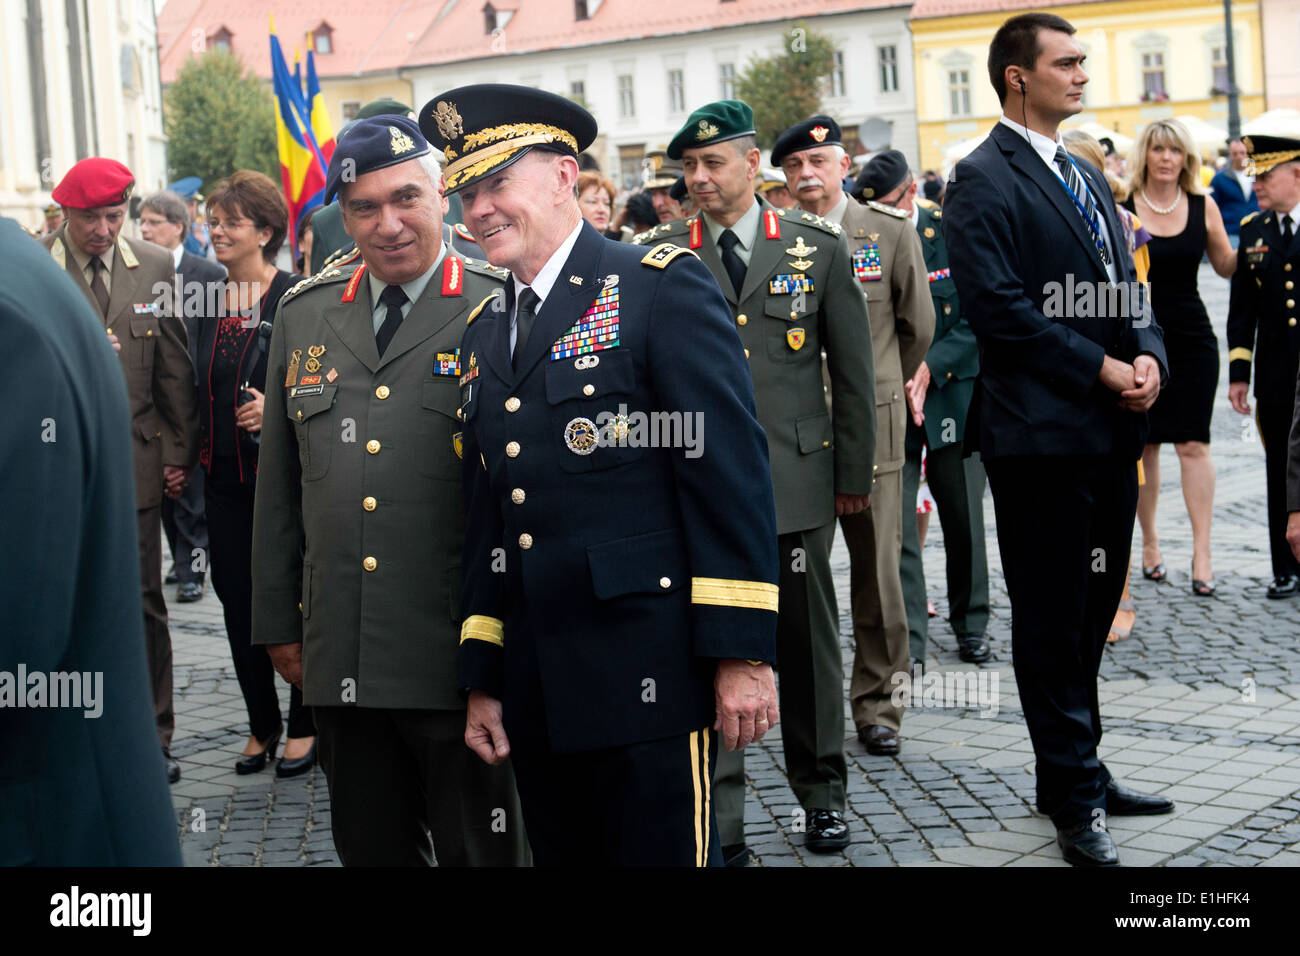 Chairman of the Joint Chiefs of Staff Army Gen. Martin E. Dempsey, center, talks with a defense official of a NATO member natio Stock Photo